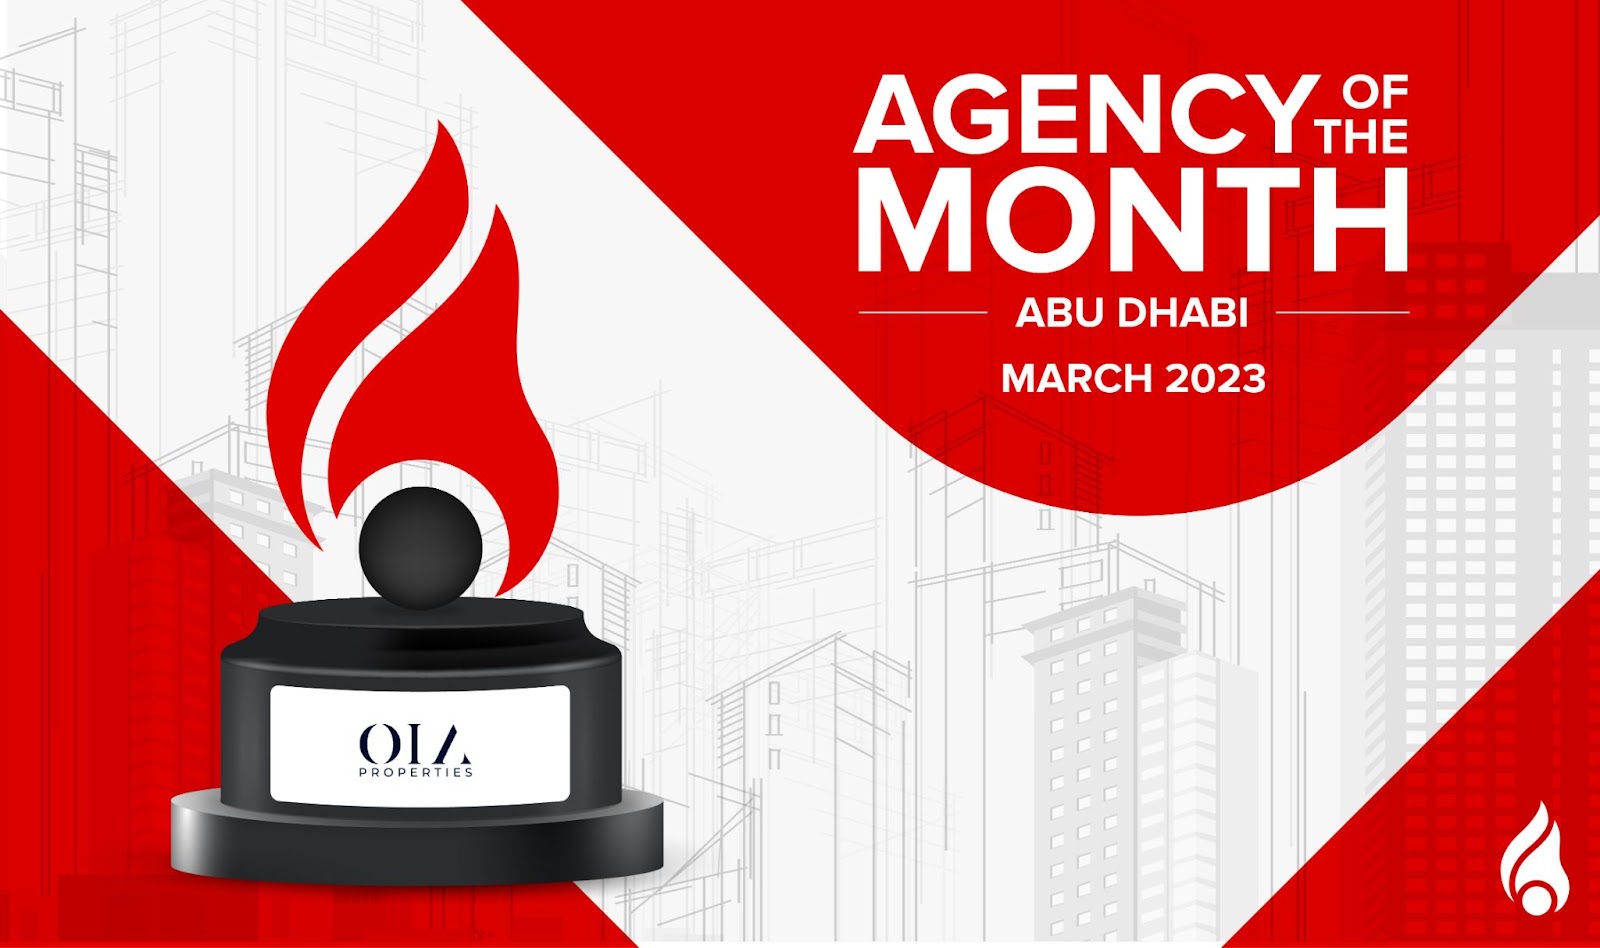 Agency of the month abu dhabi March 2023